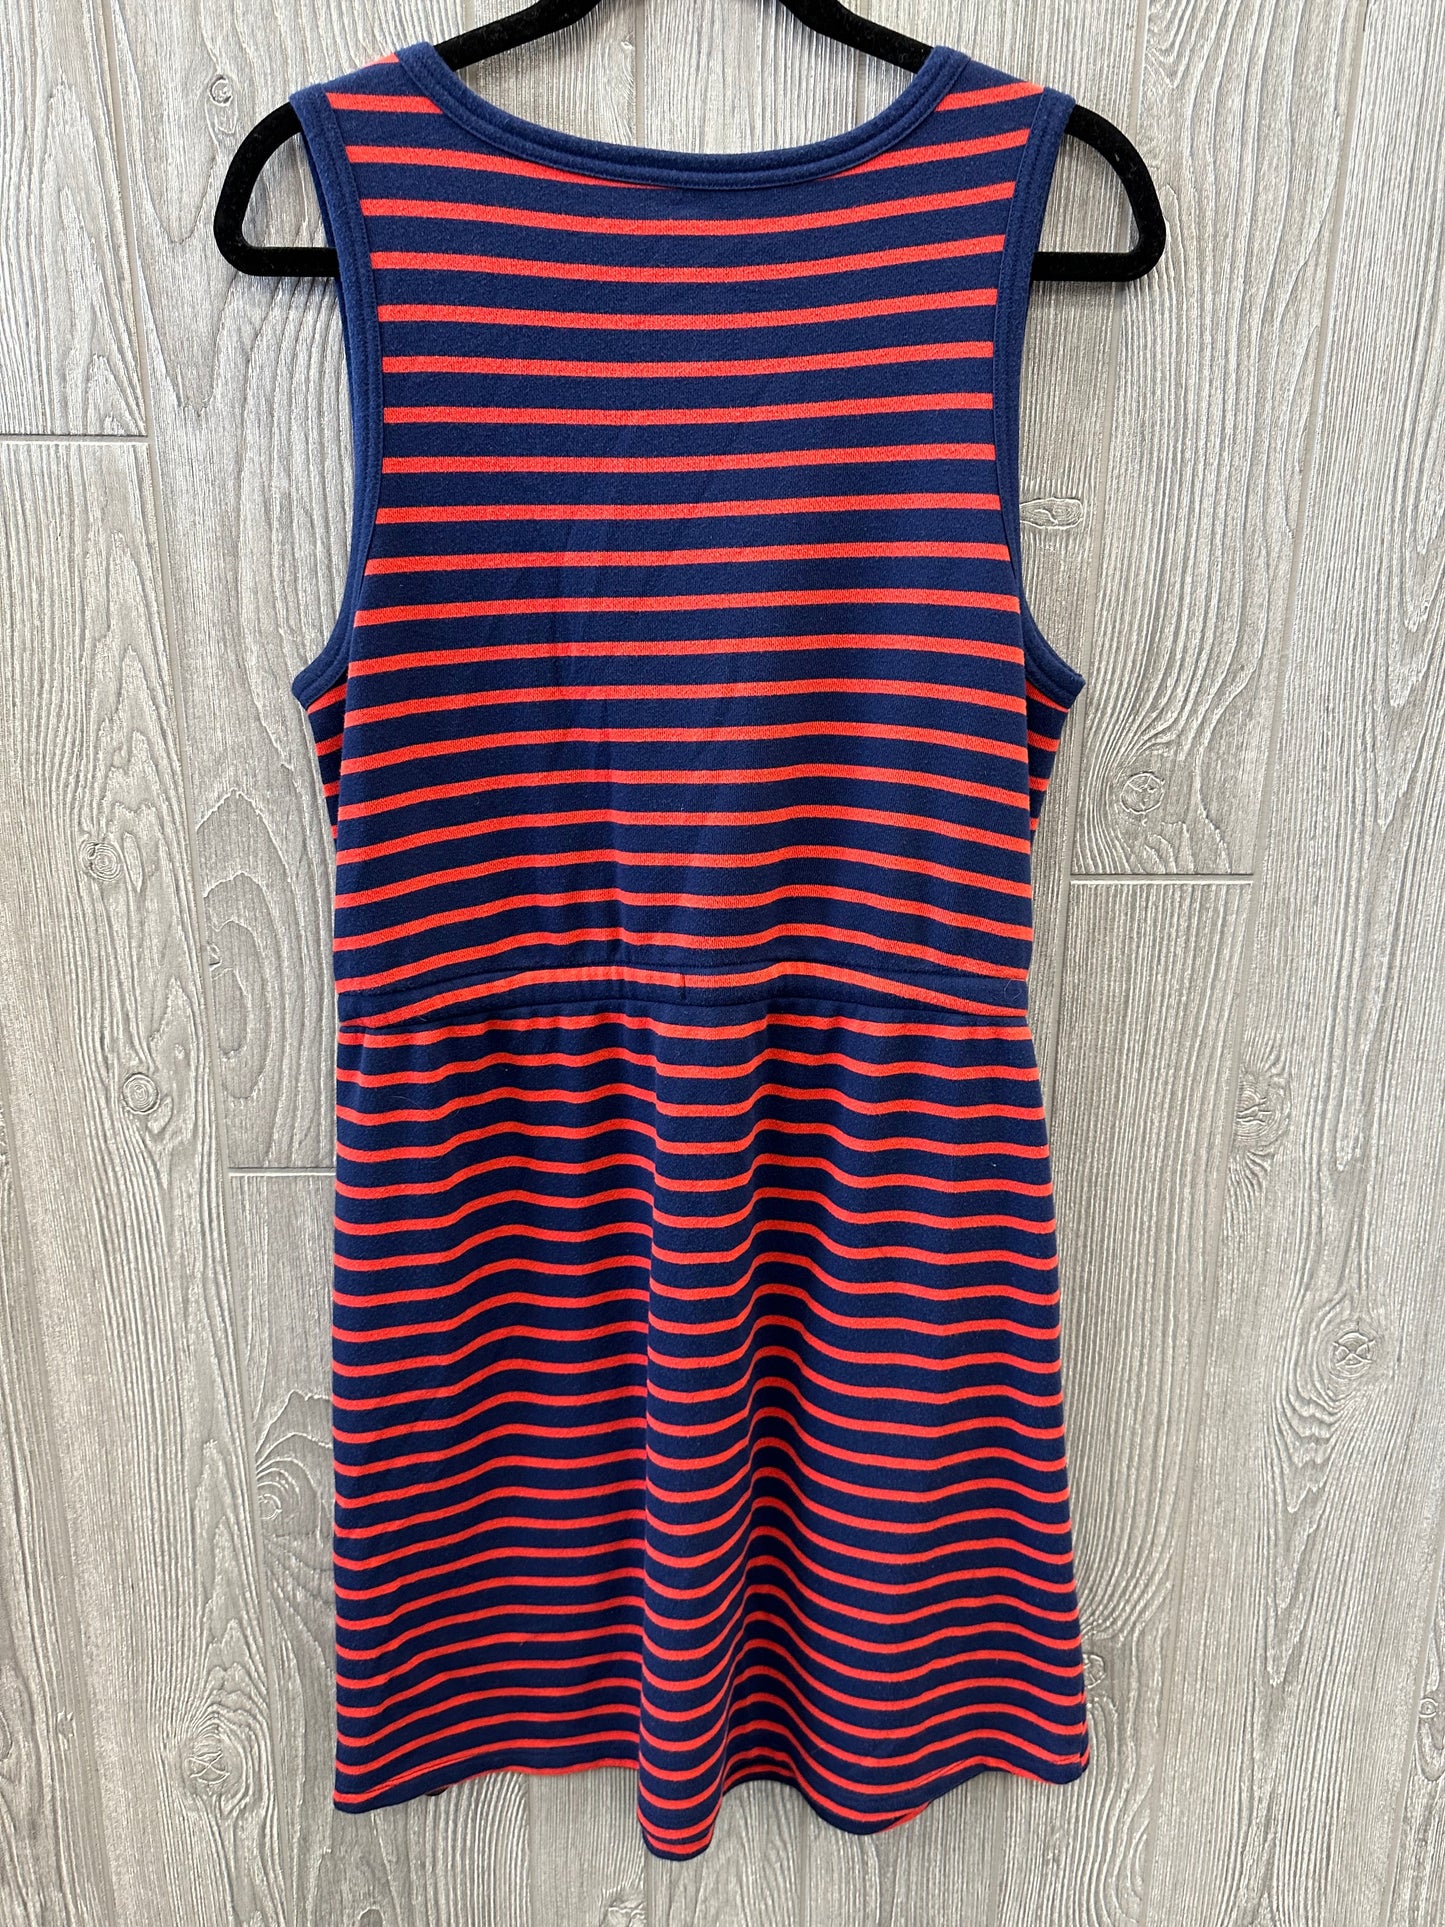 Dress Casual Short By St Johns Bay  Size: L